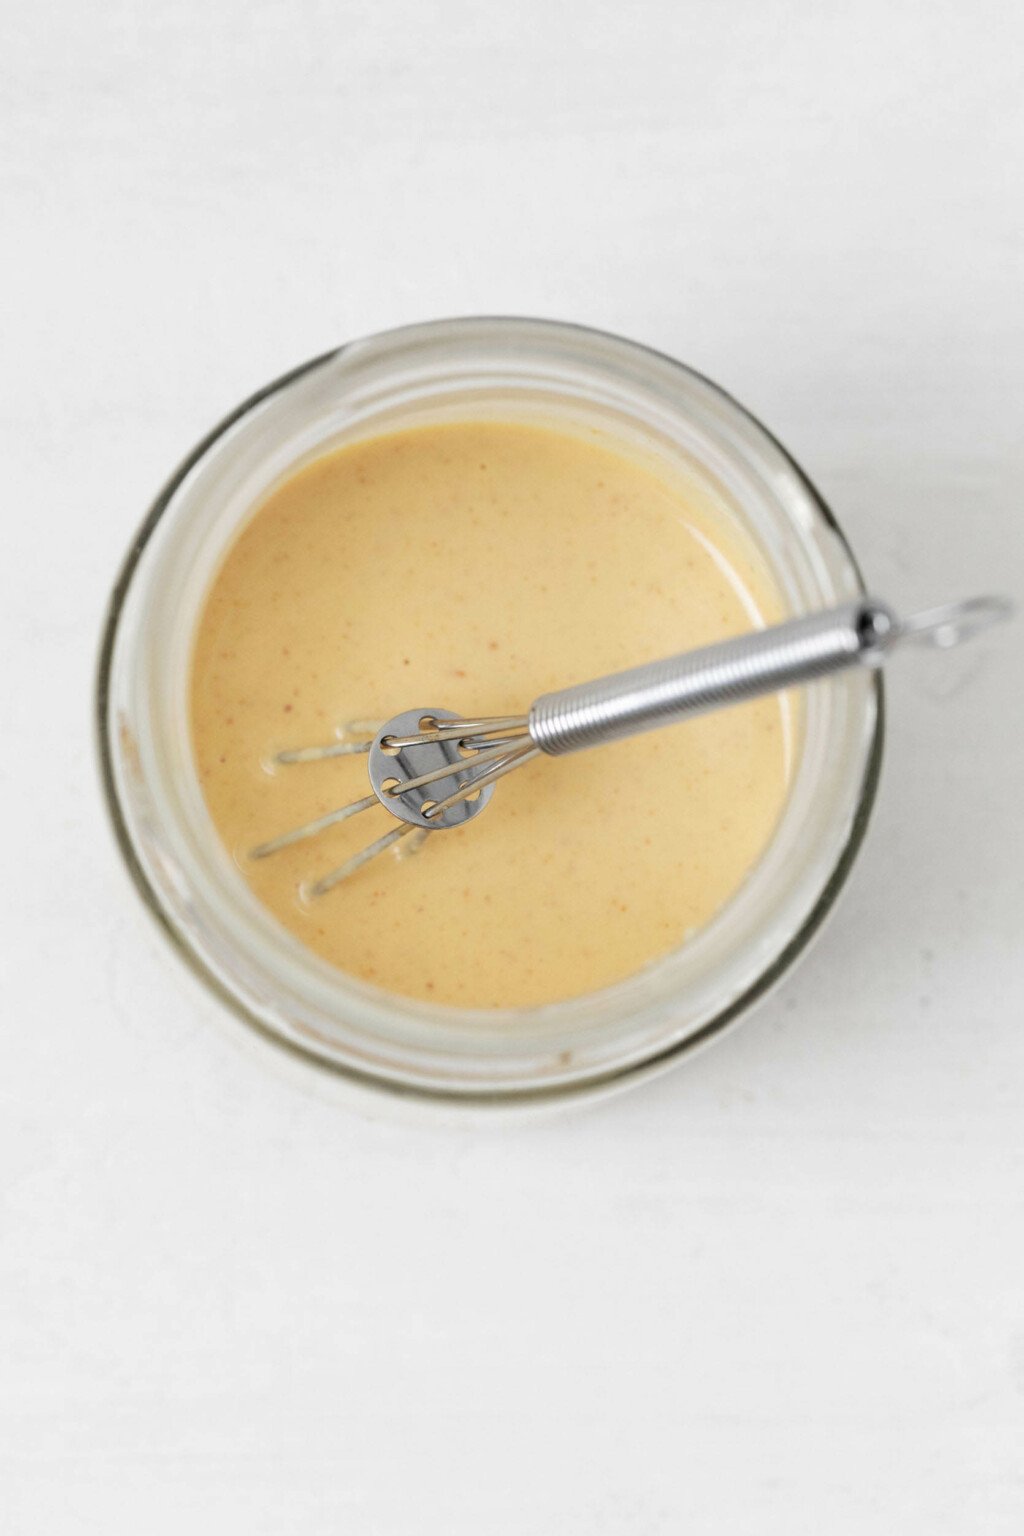 A Dijon lemon tahini dressing is being whisked in a small, round, Pyrex bowl.